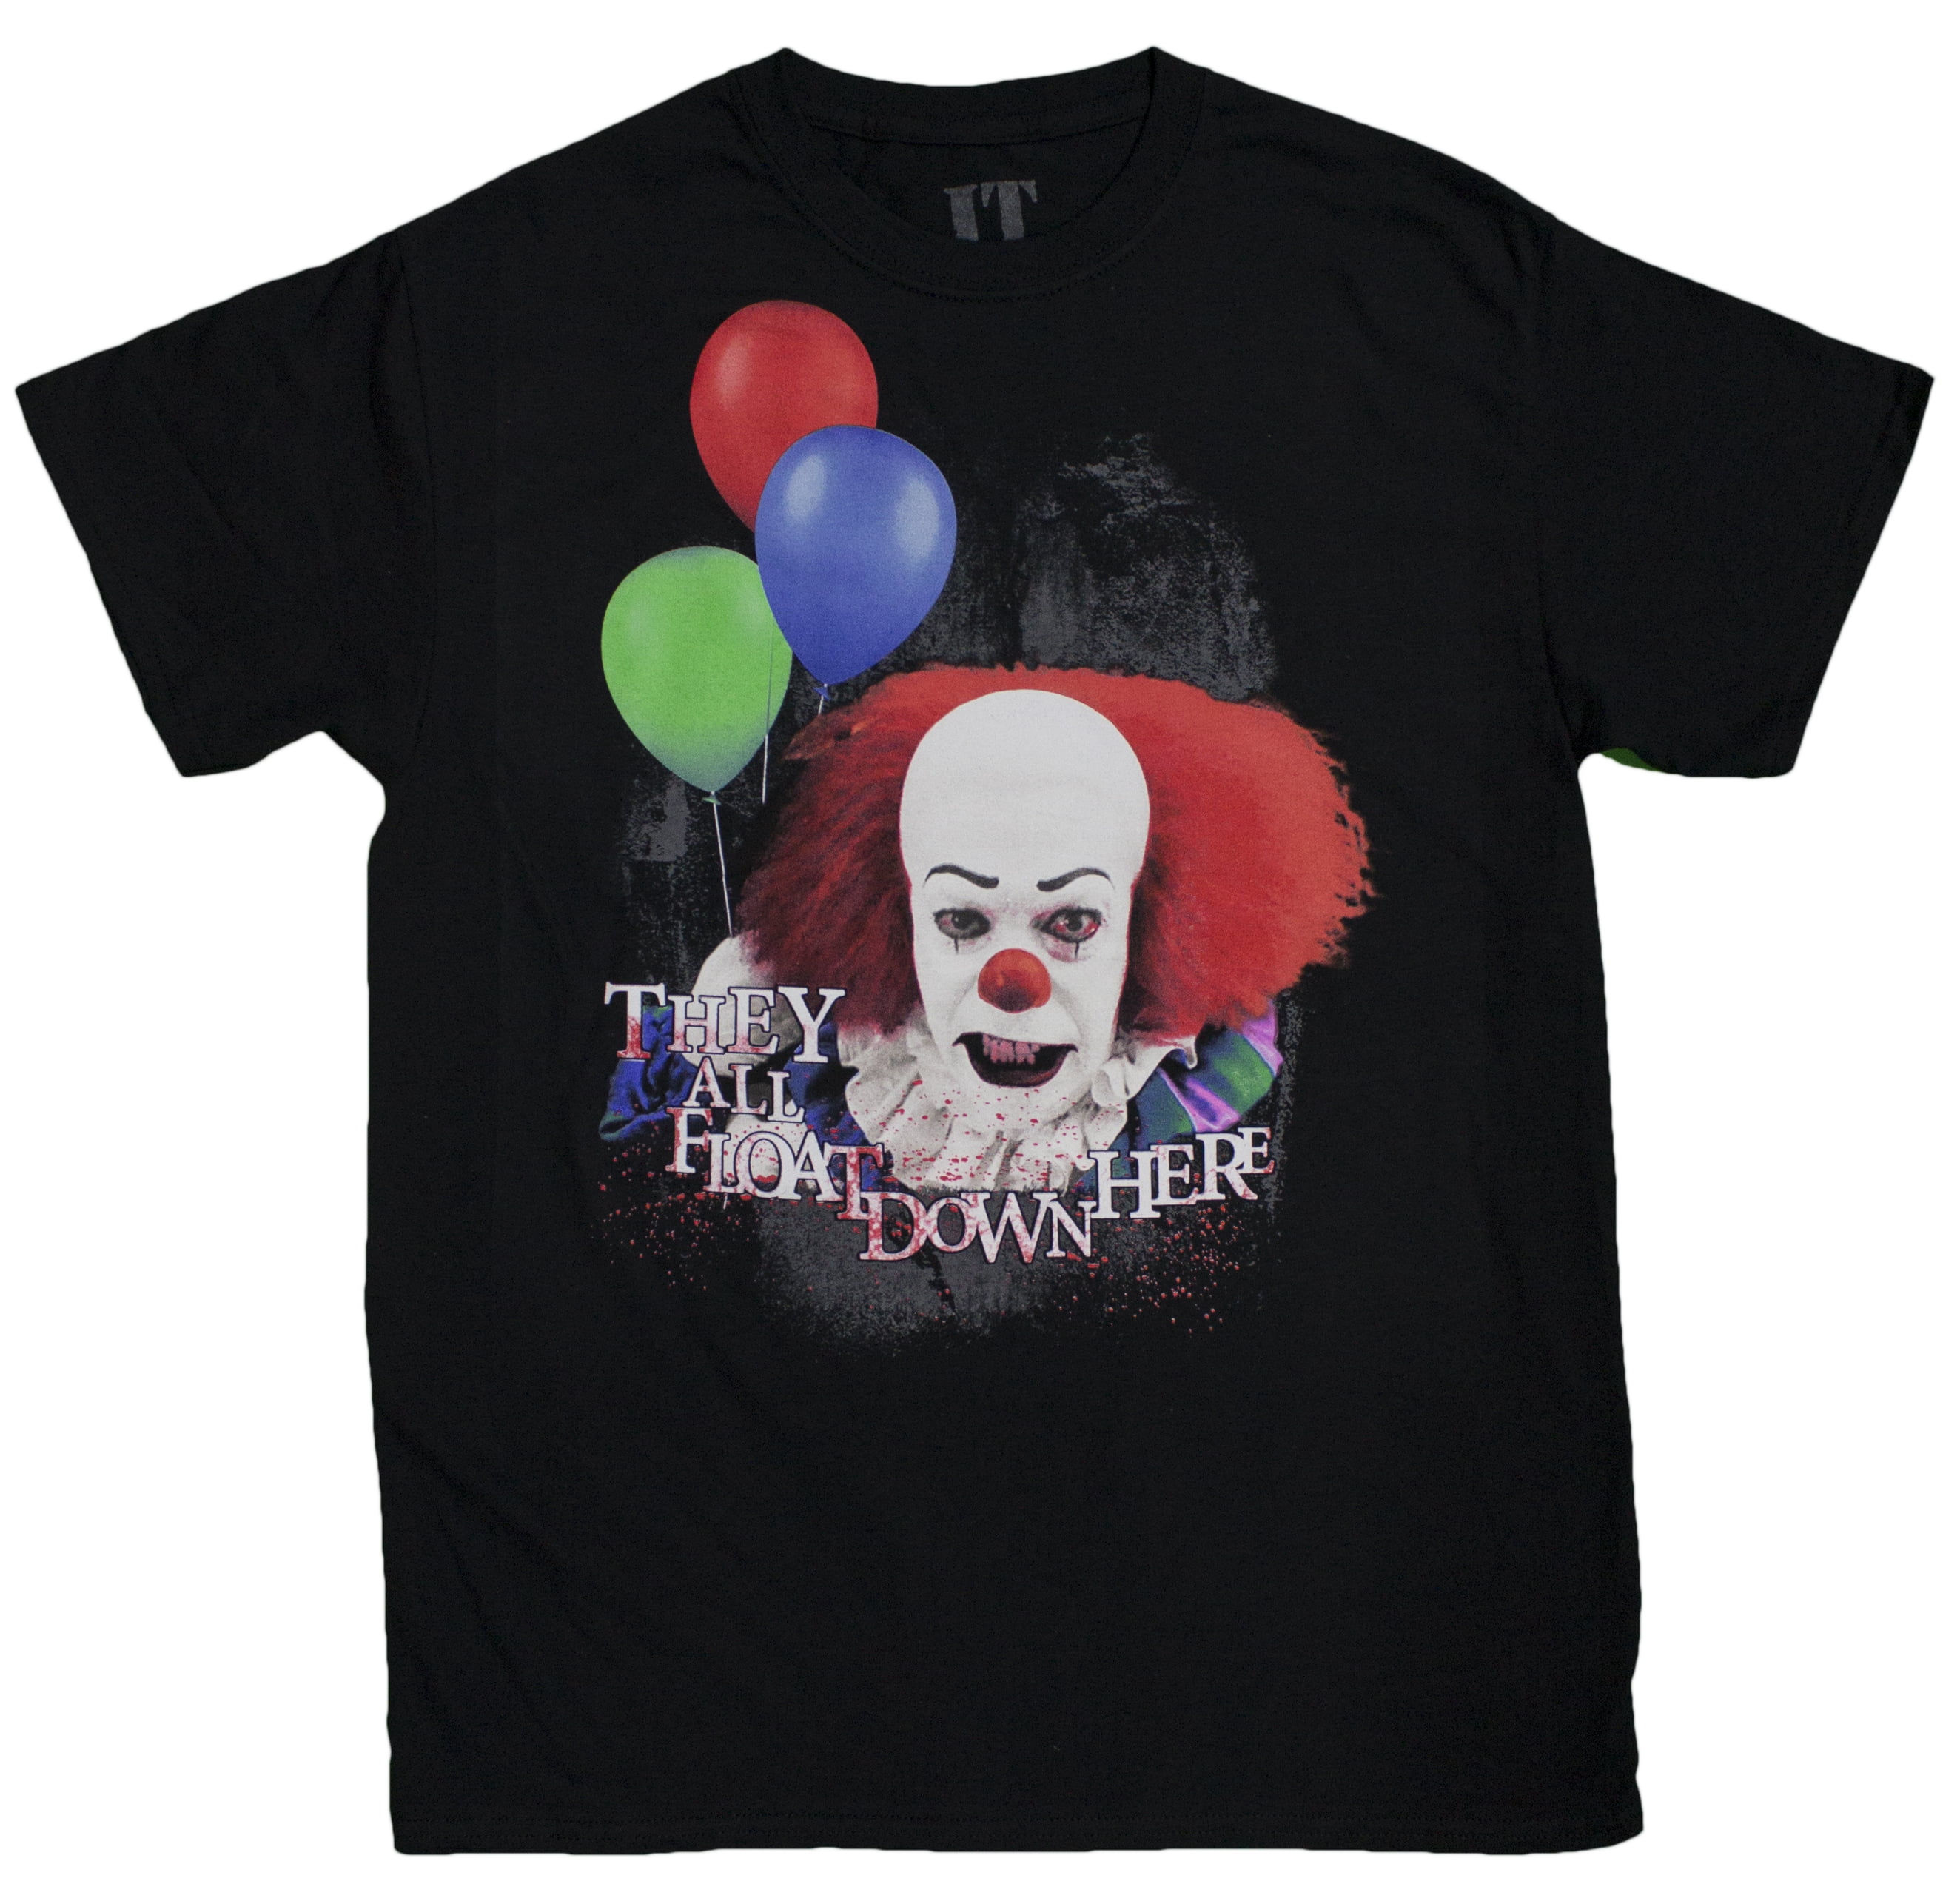 Pennywise the Clown "They Float Down Here" T-Shirt Walmart.com